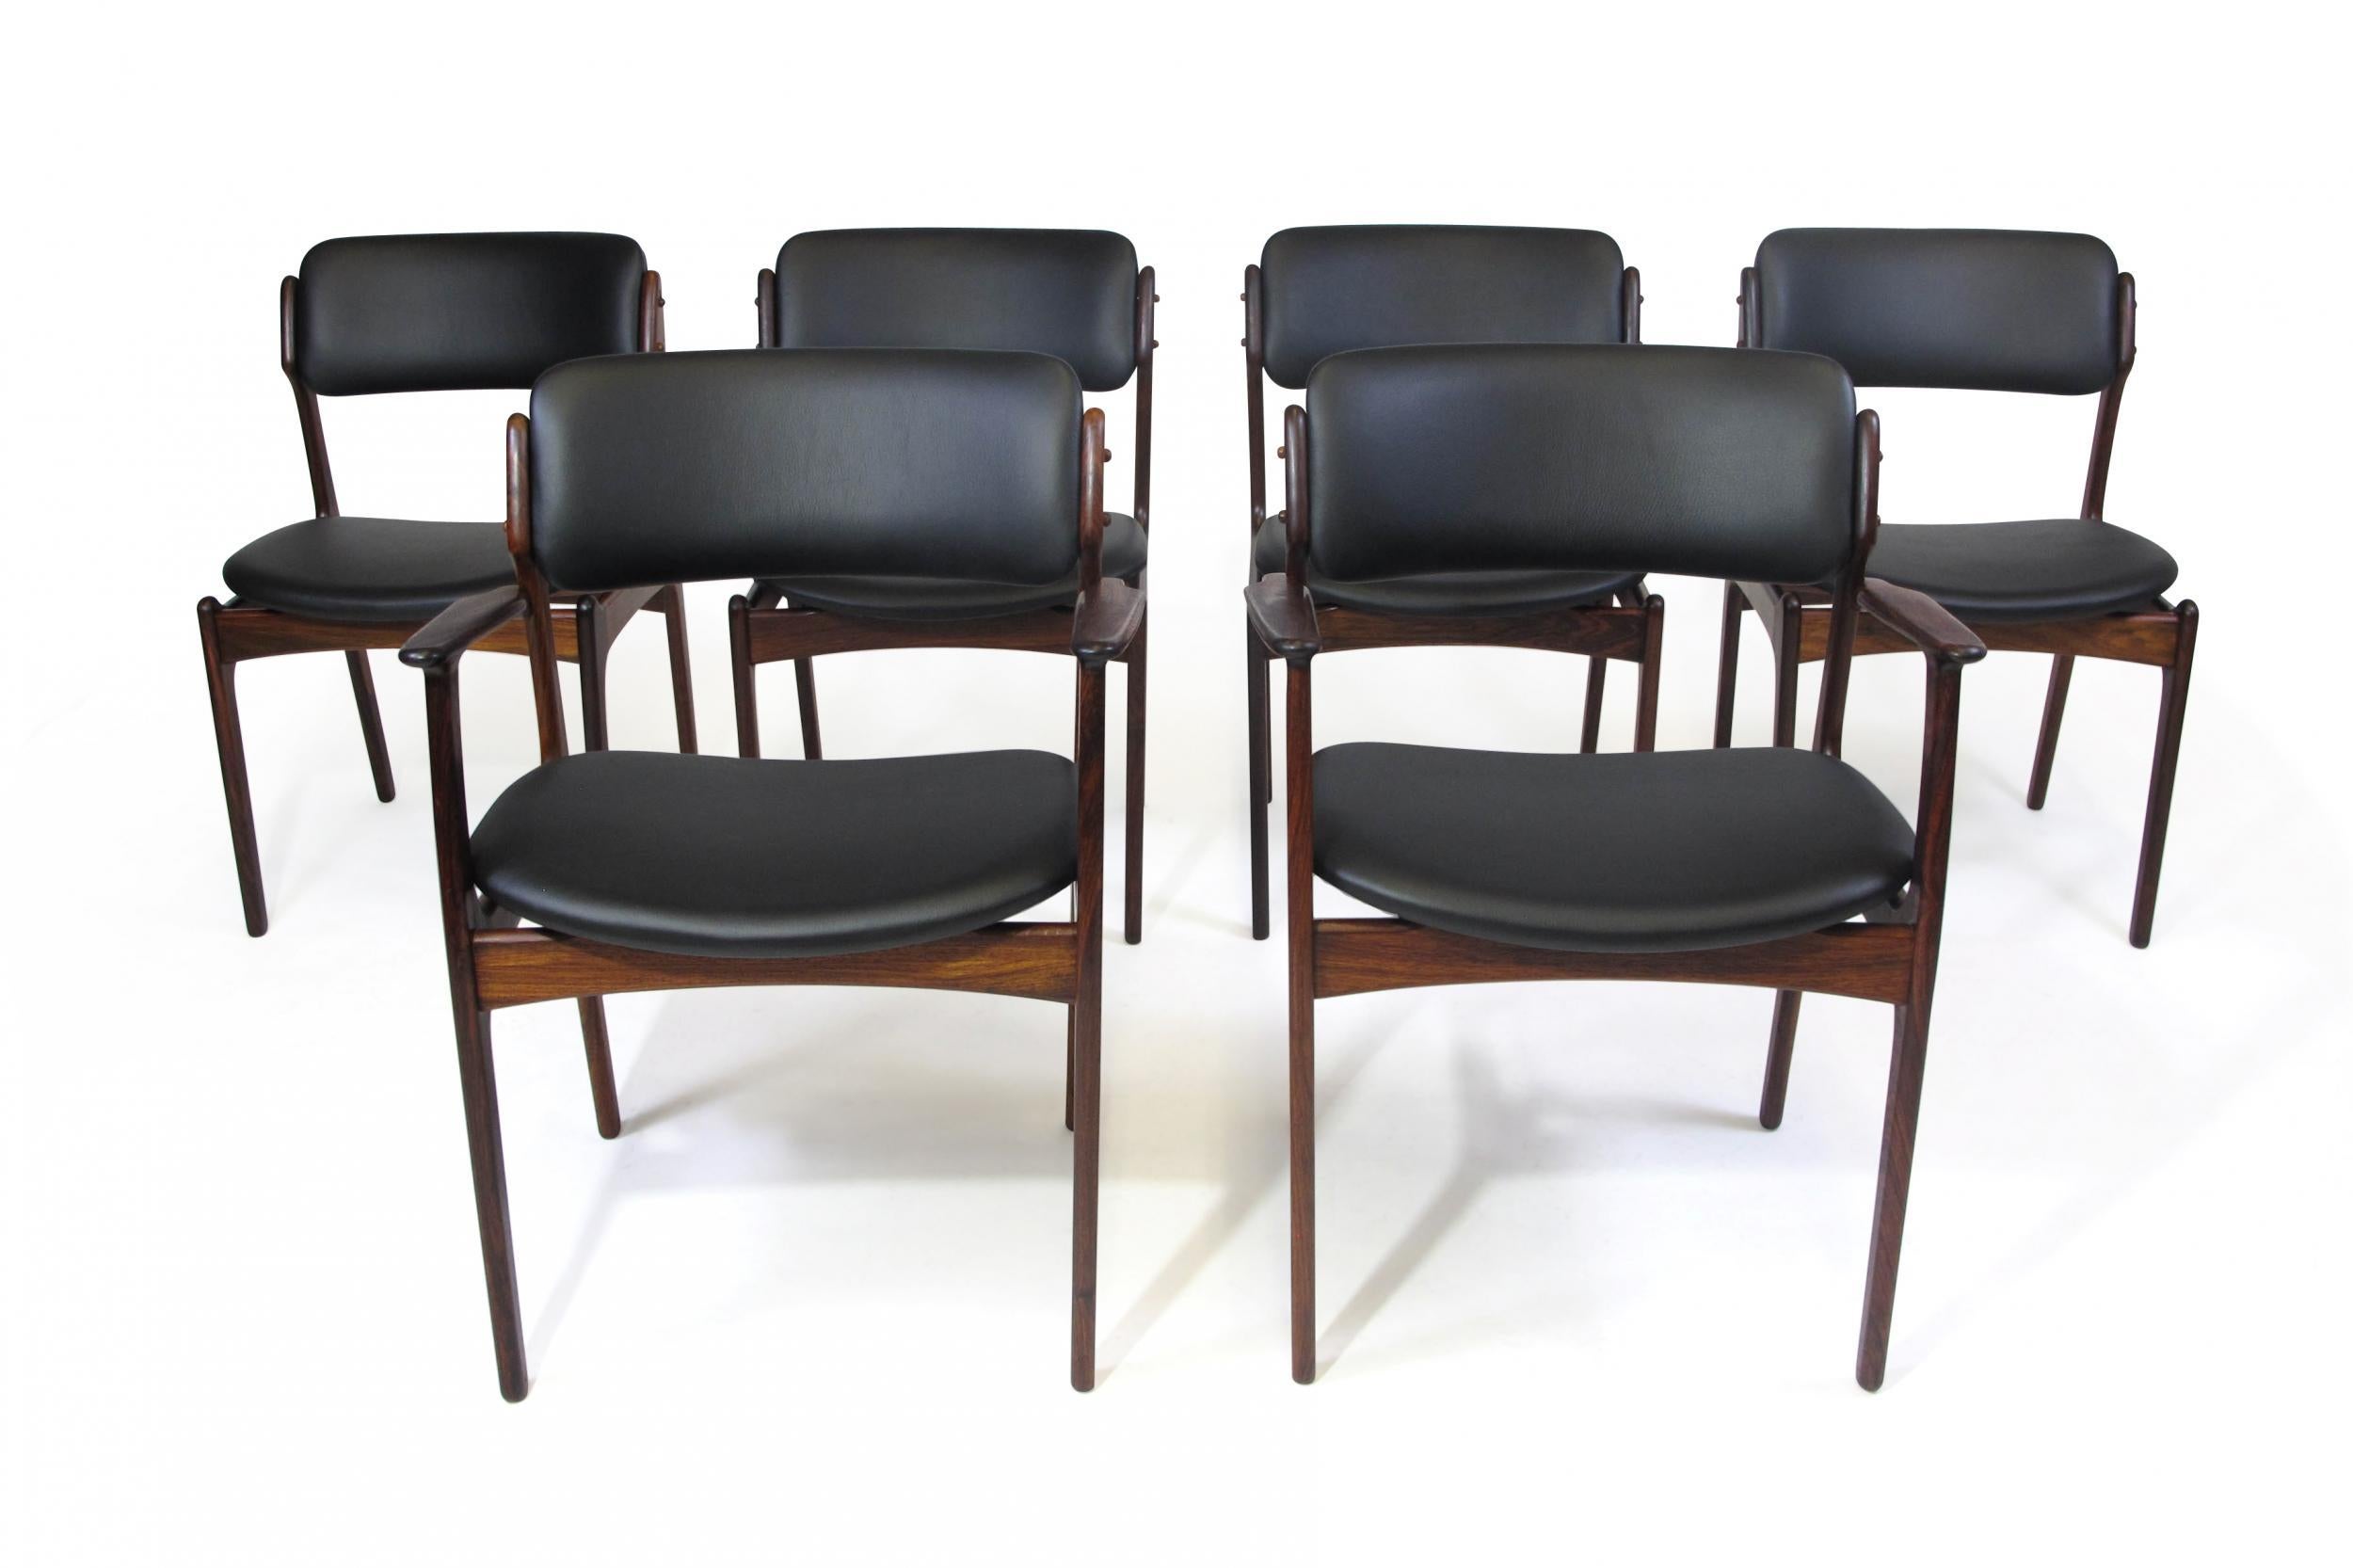 Set of six dining chairs designed by Erik Buck for Poul Dinesen Model 49 & 50. Chairs crafted of solid Brazilian rosewood frames with floating seats and curved back rests newly upholstered in black leather in a soft matte finish. Finely restored by